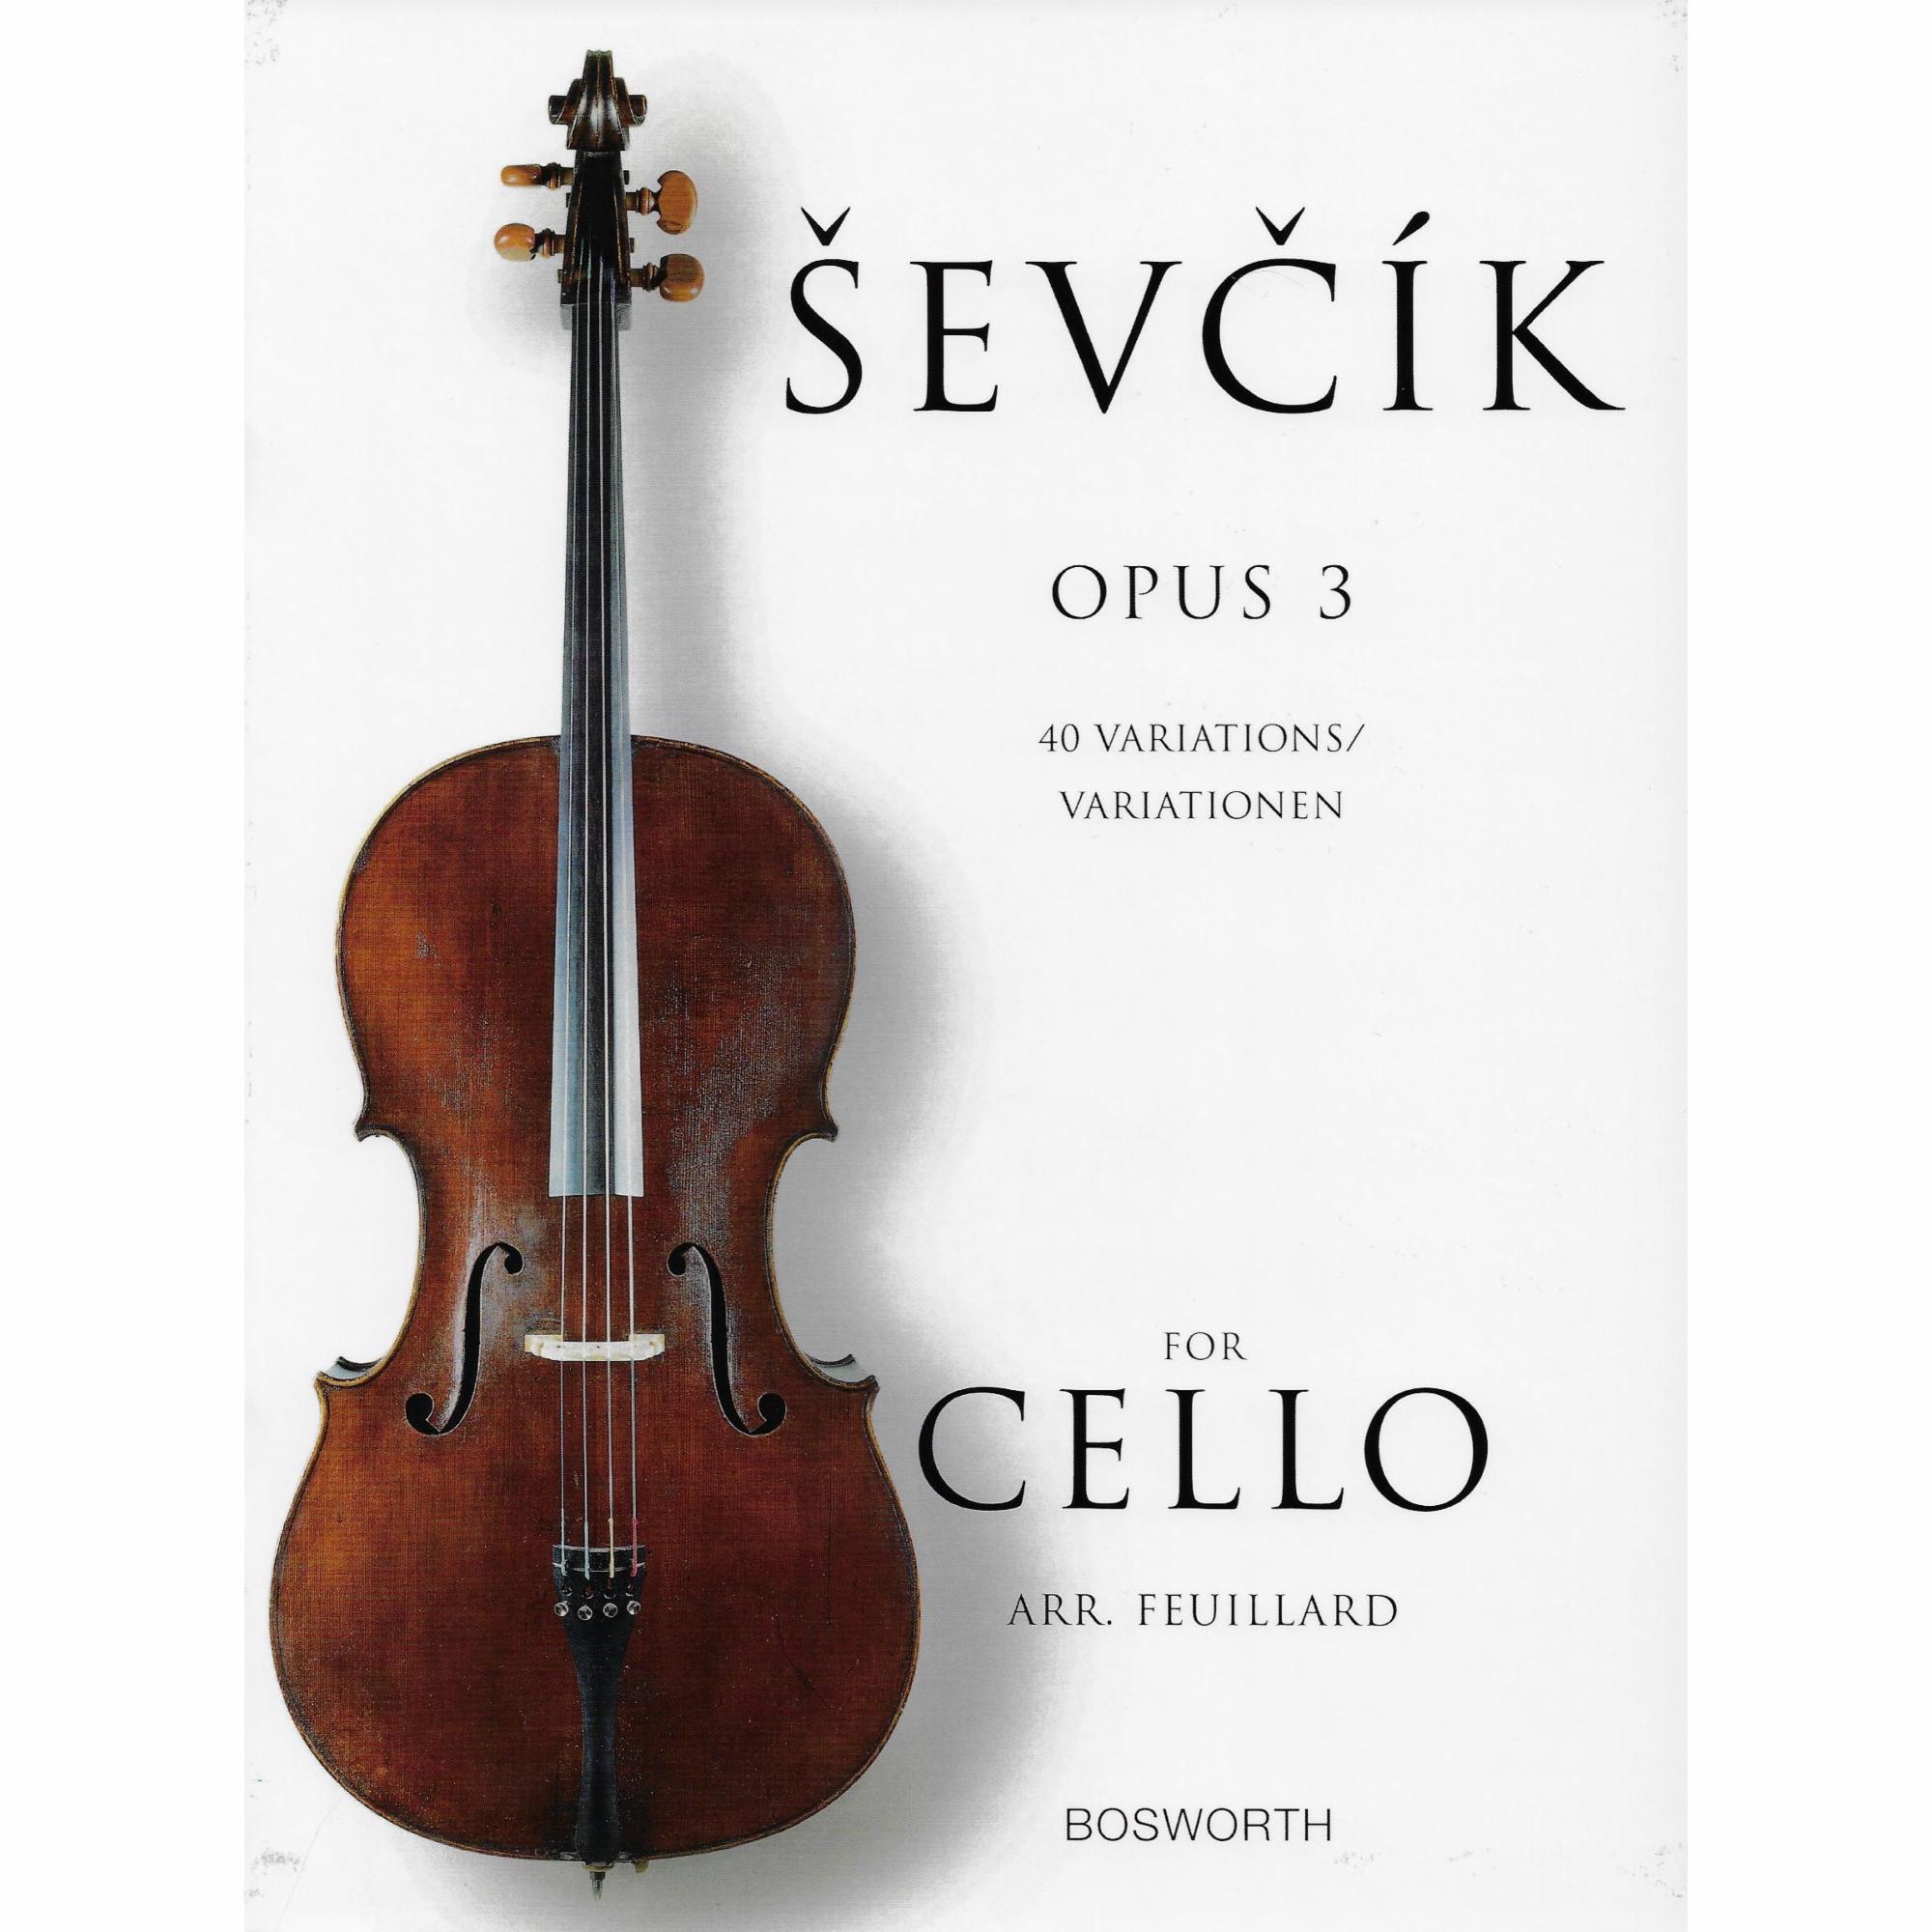 Sevcik -- 40 Variations, Op. 3 for Cello